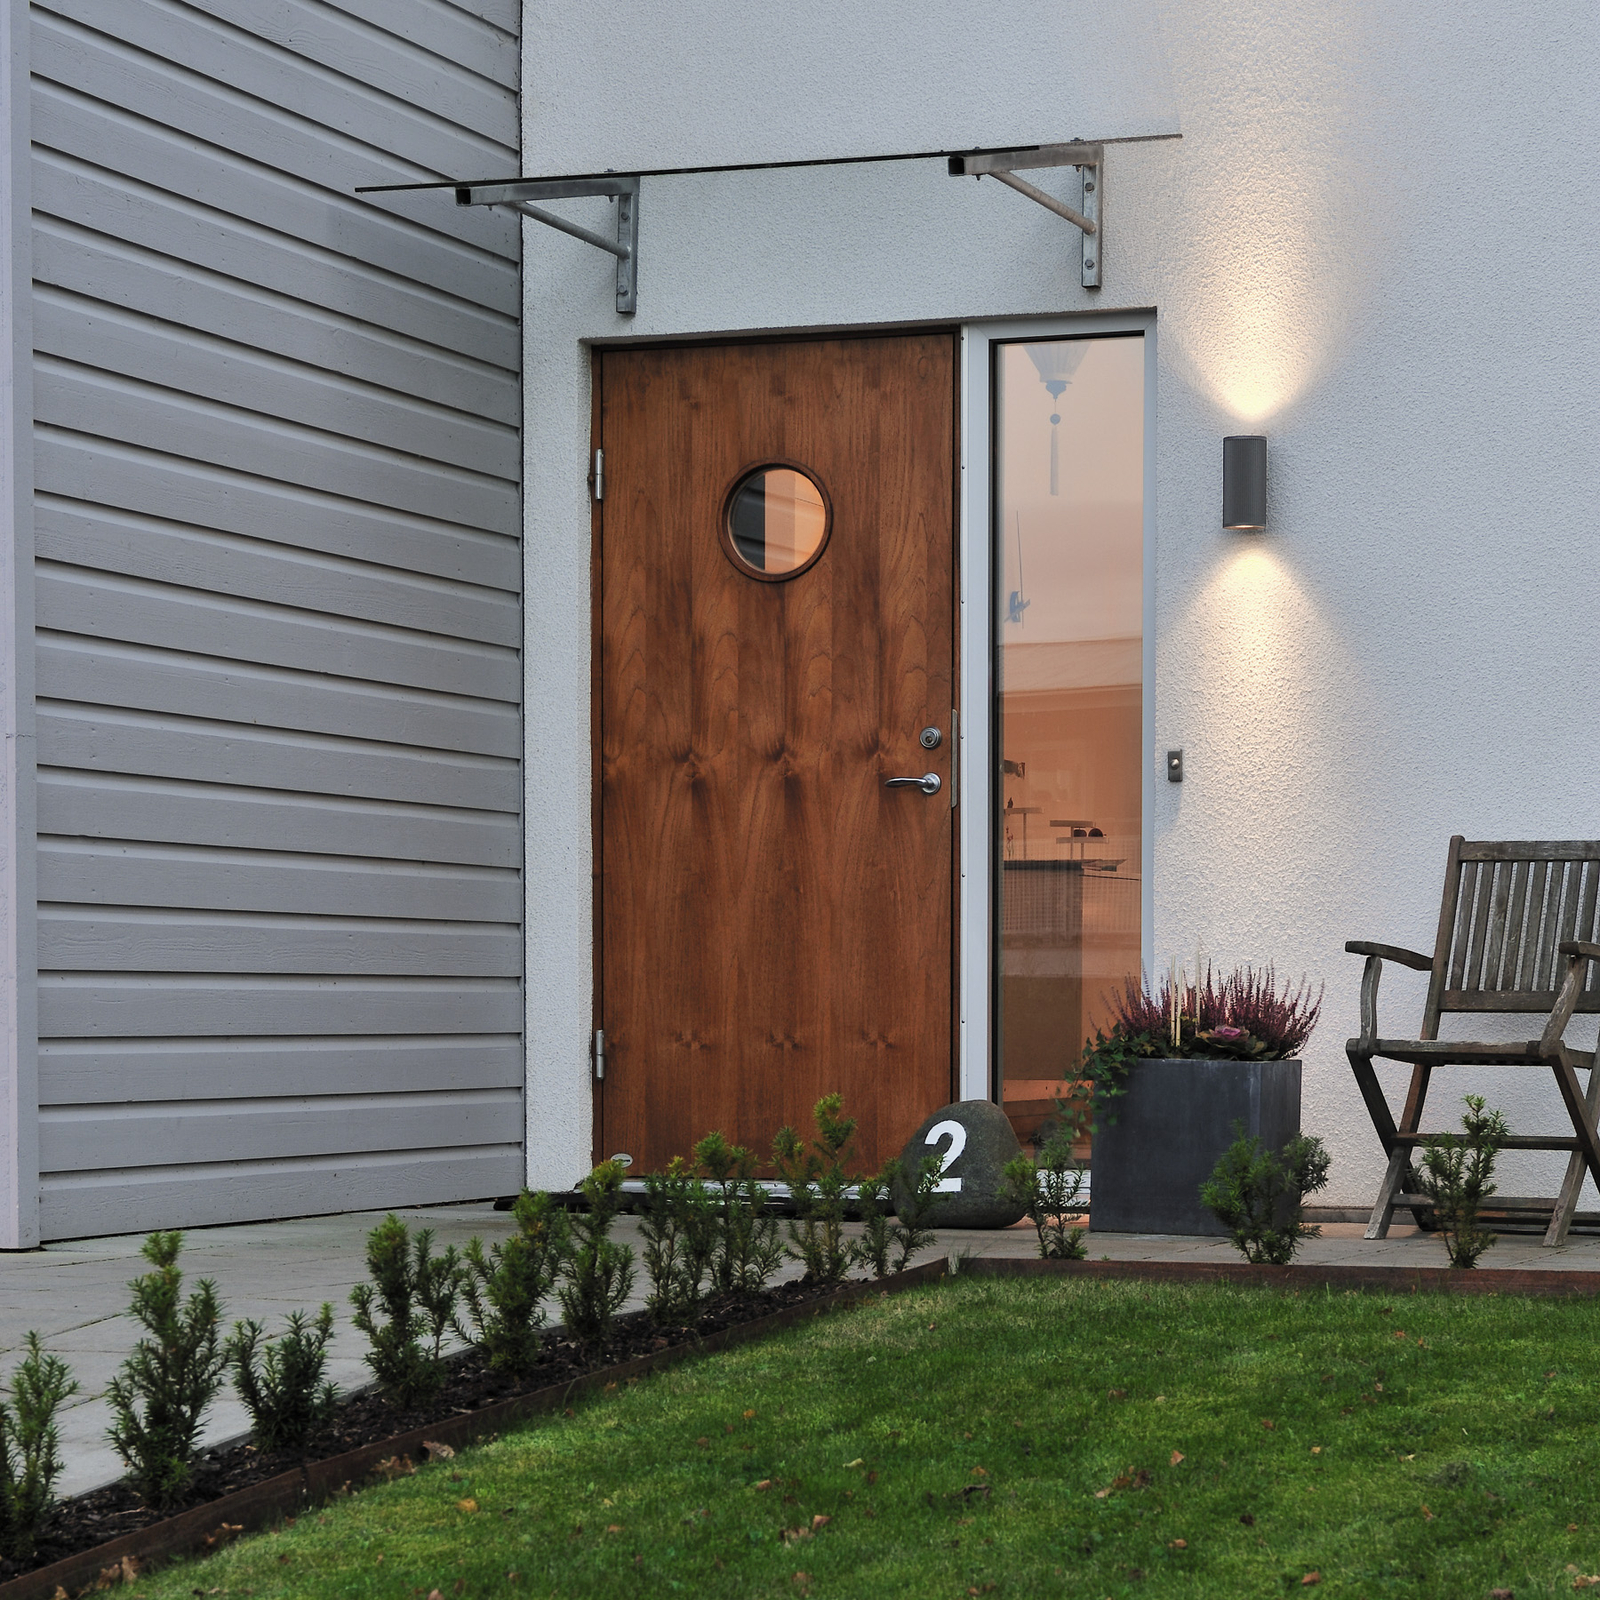 Siracusa outdoor wall light with up and down light